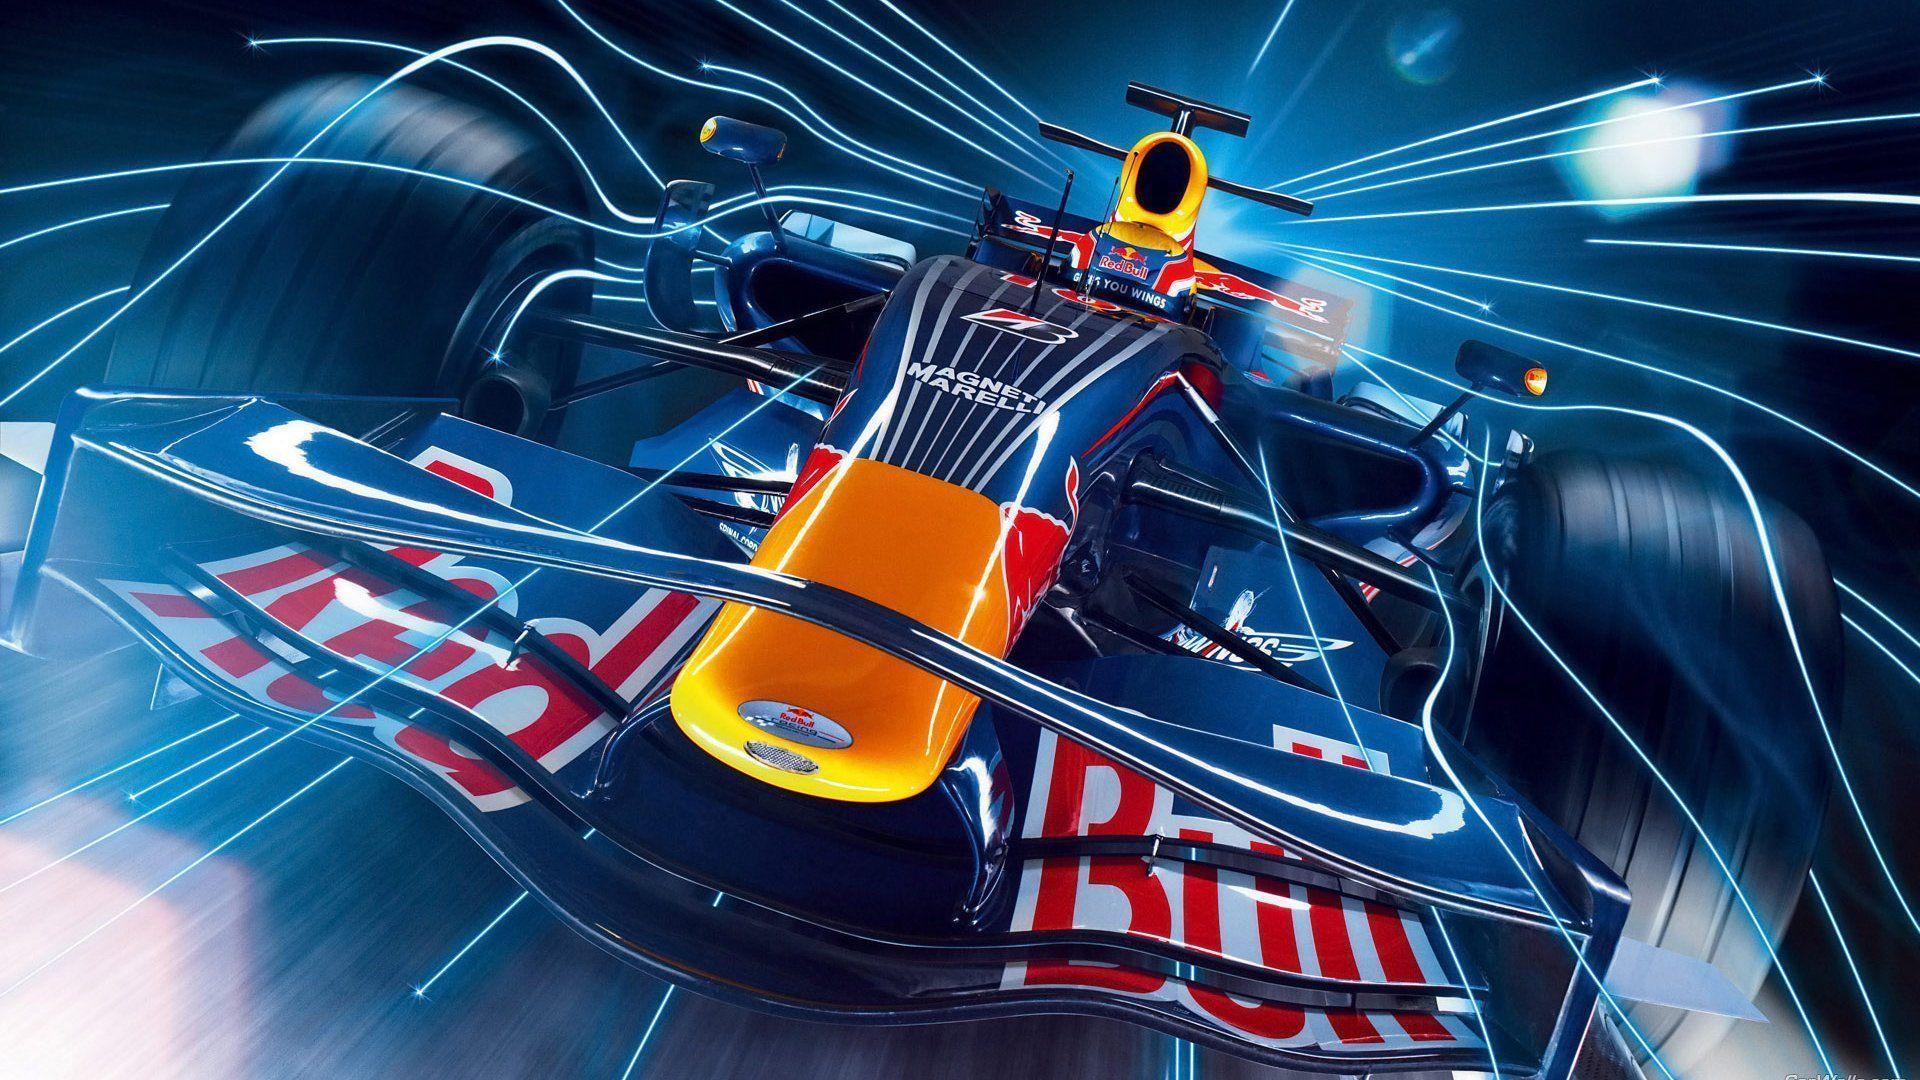 Nothing found for Cars Sports Formula One Red Bull Racing